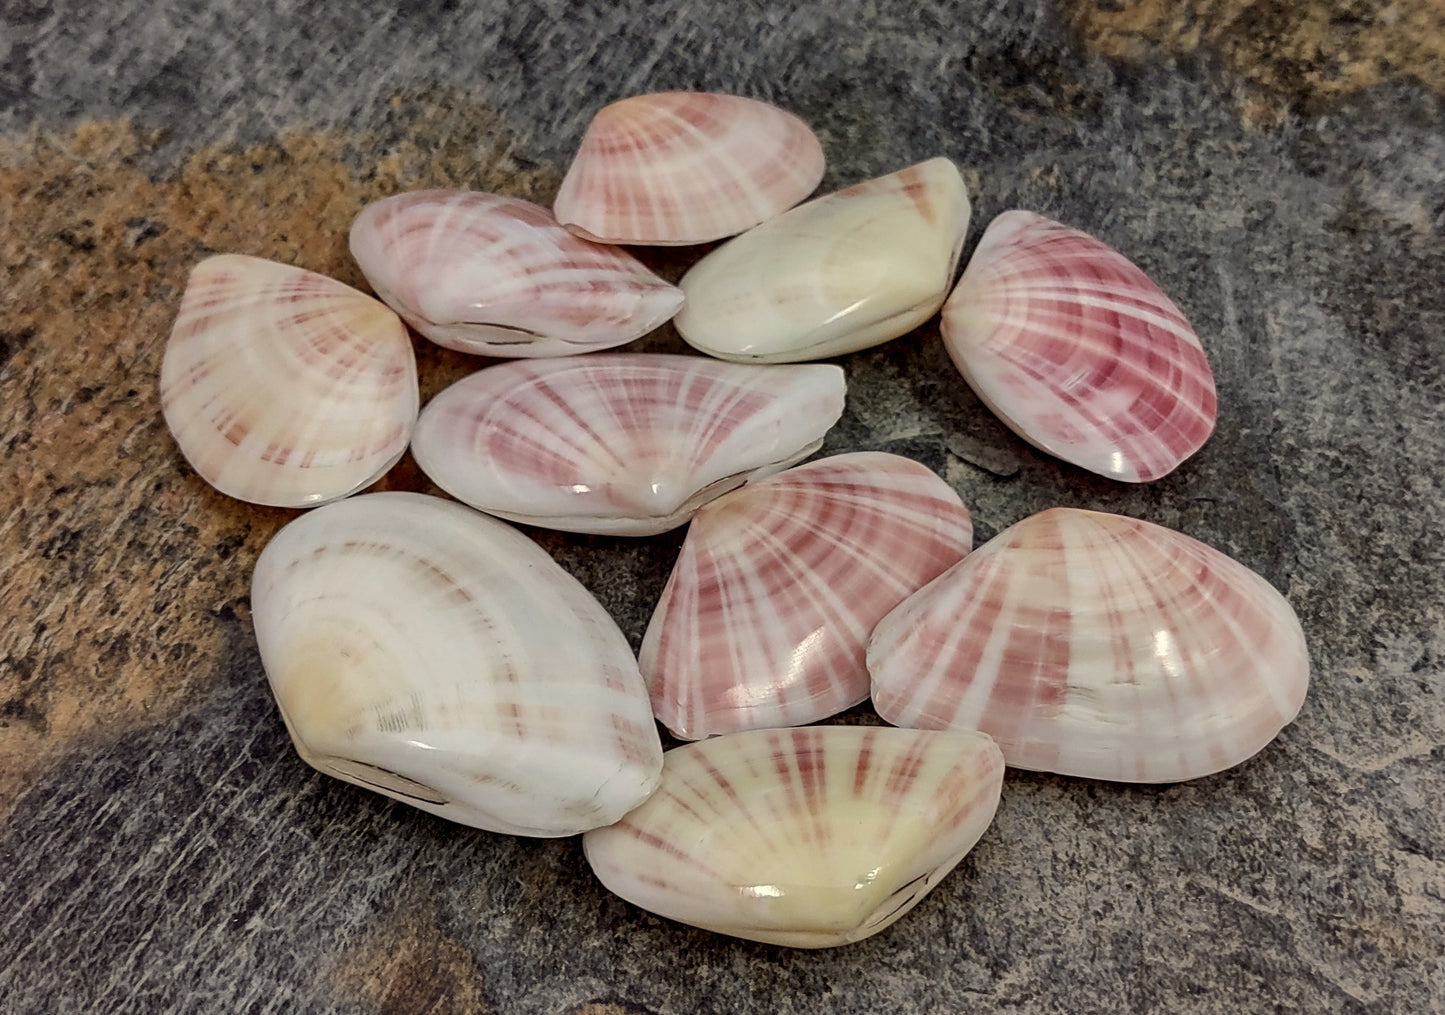 Sunrise Tellin Clam Polished Seashells - Tellina Radiata - (10 Pairs approx. 1.25-2 inches). Multiple pink and white streaked ombre shells in a pile. Copyright 2022 SeaShellSupply.com.